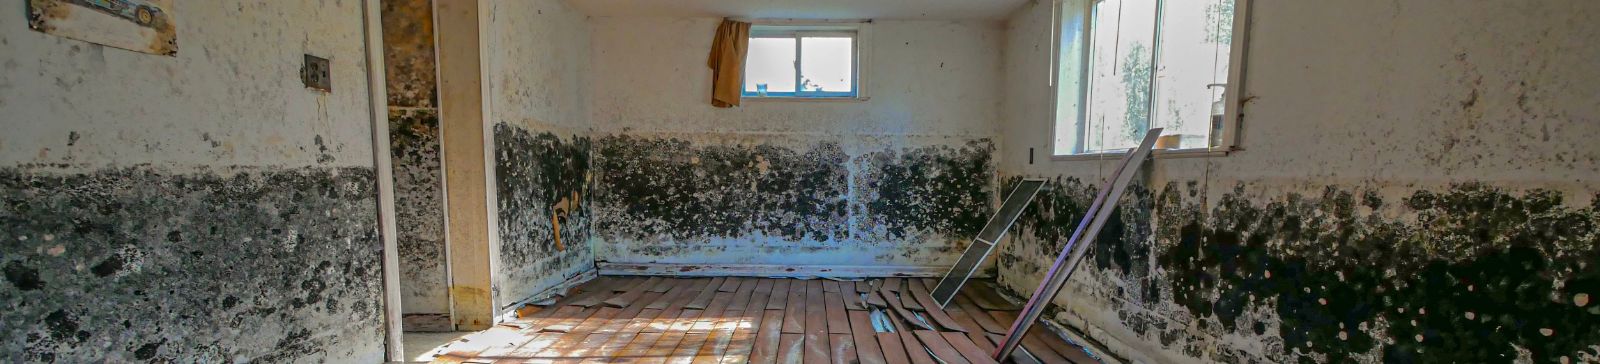 Safeguarding Children: The Importance of Preventing Mold Exposure